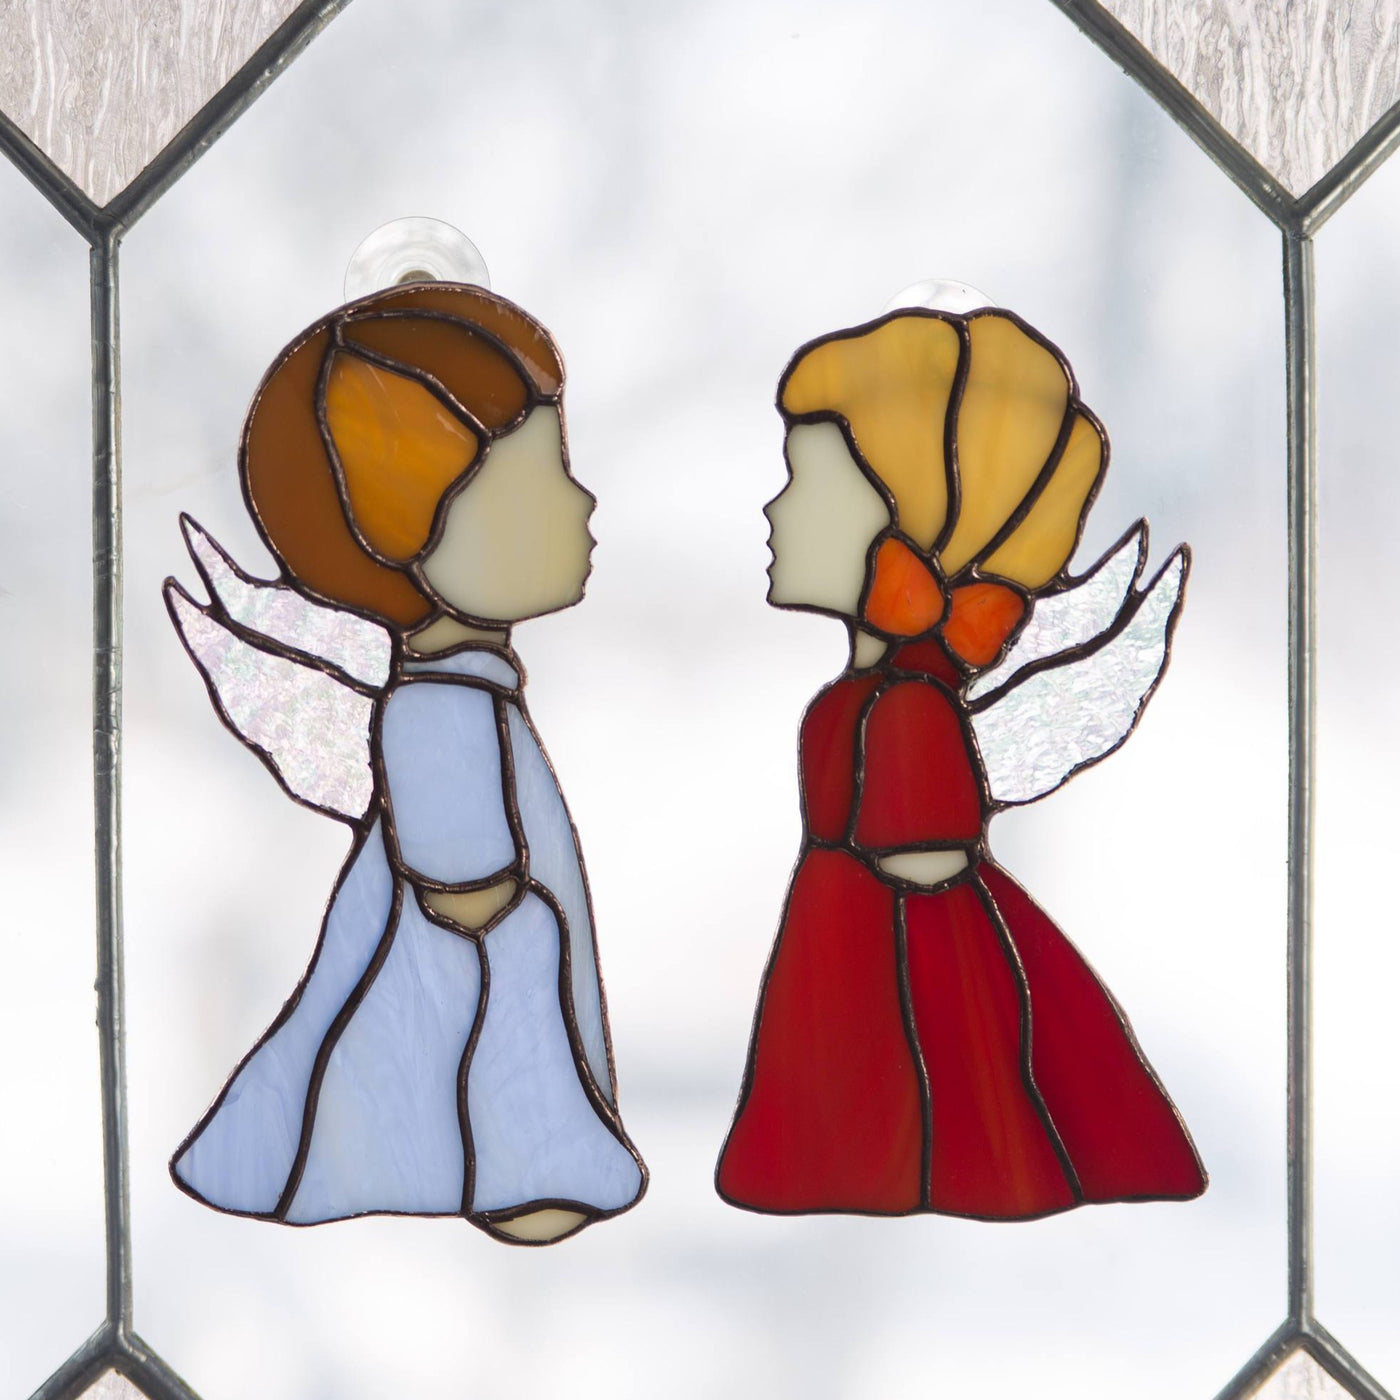 Window hanging of stained glass blue angel boy and red angel girl